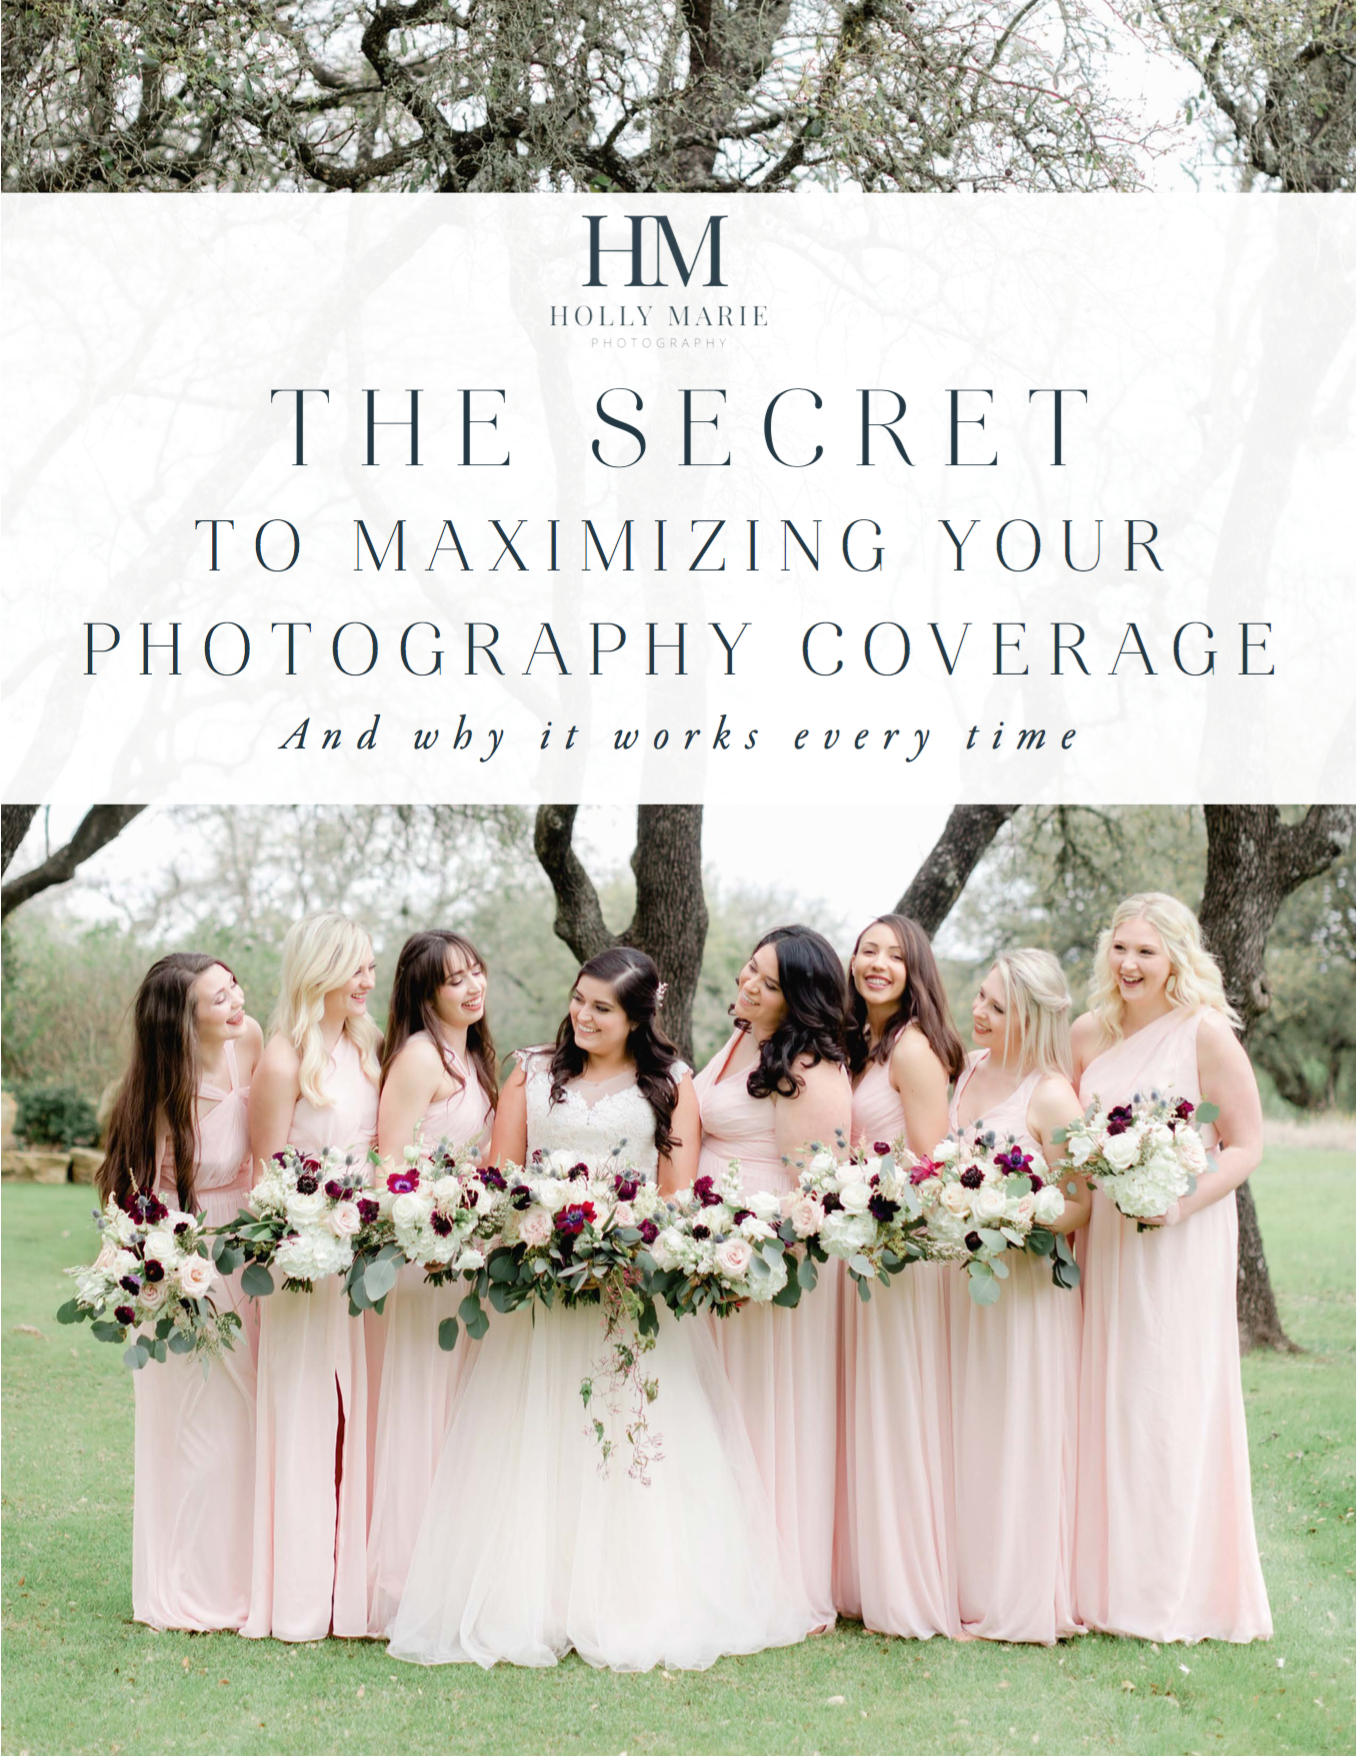 Psst...it’s time to let you in on a little secret. This strategy is what 100% for our couples use have eight hours of wedding photography coverage. Click through to download the freebie on how to maximize your wedding photography coverage!